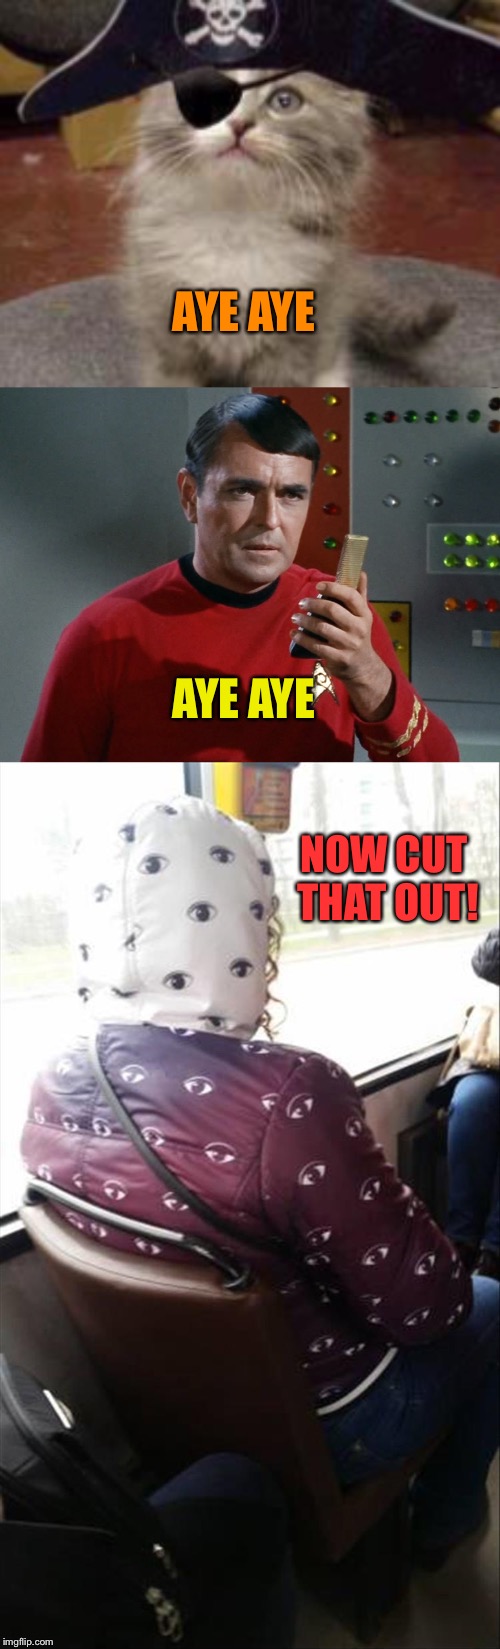 Everyone's a comedian. | AYE AYE; AYE AYE; NOW CUT THAT OUT! | image tagged in scotty star trek,memes,funny,eyes | made w/ Imgflip meme maker